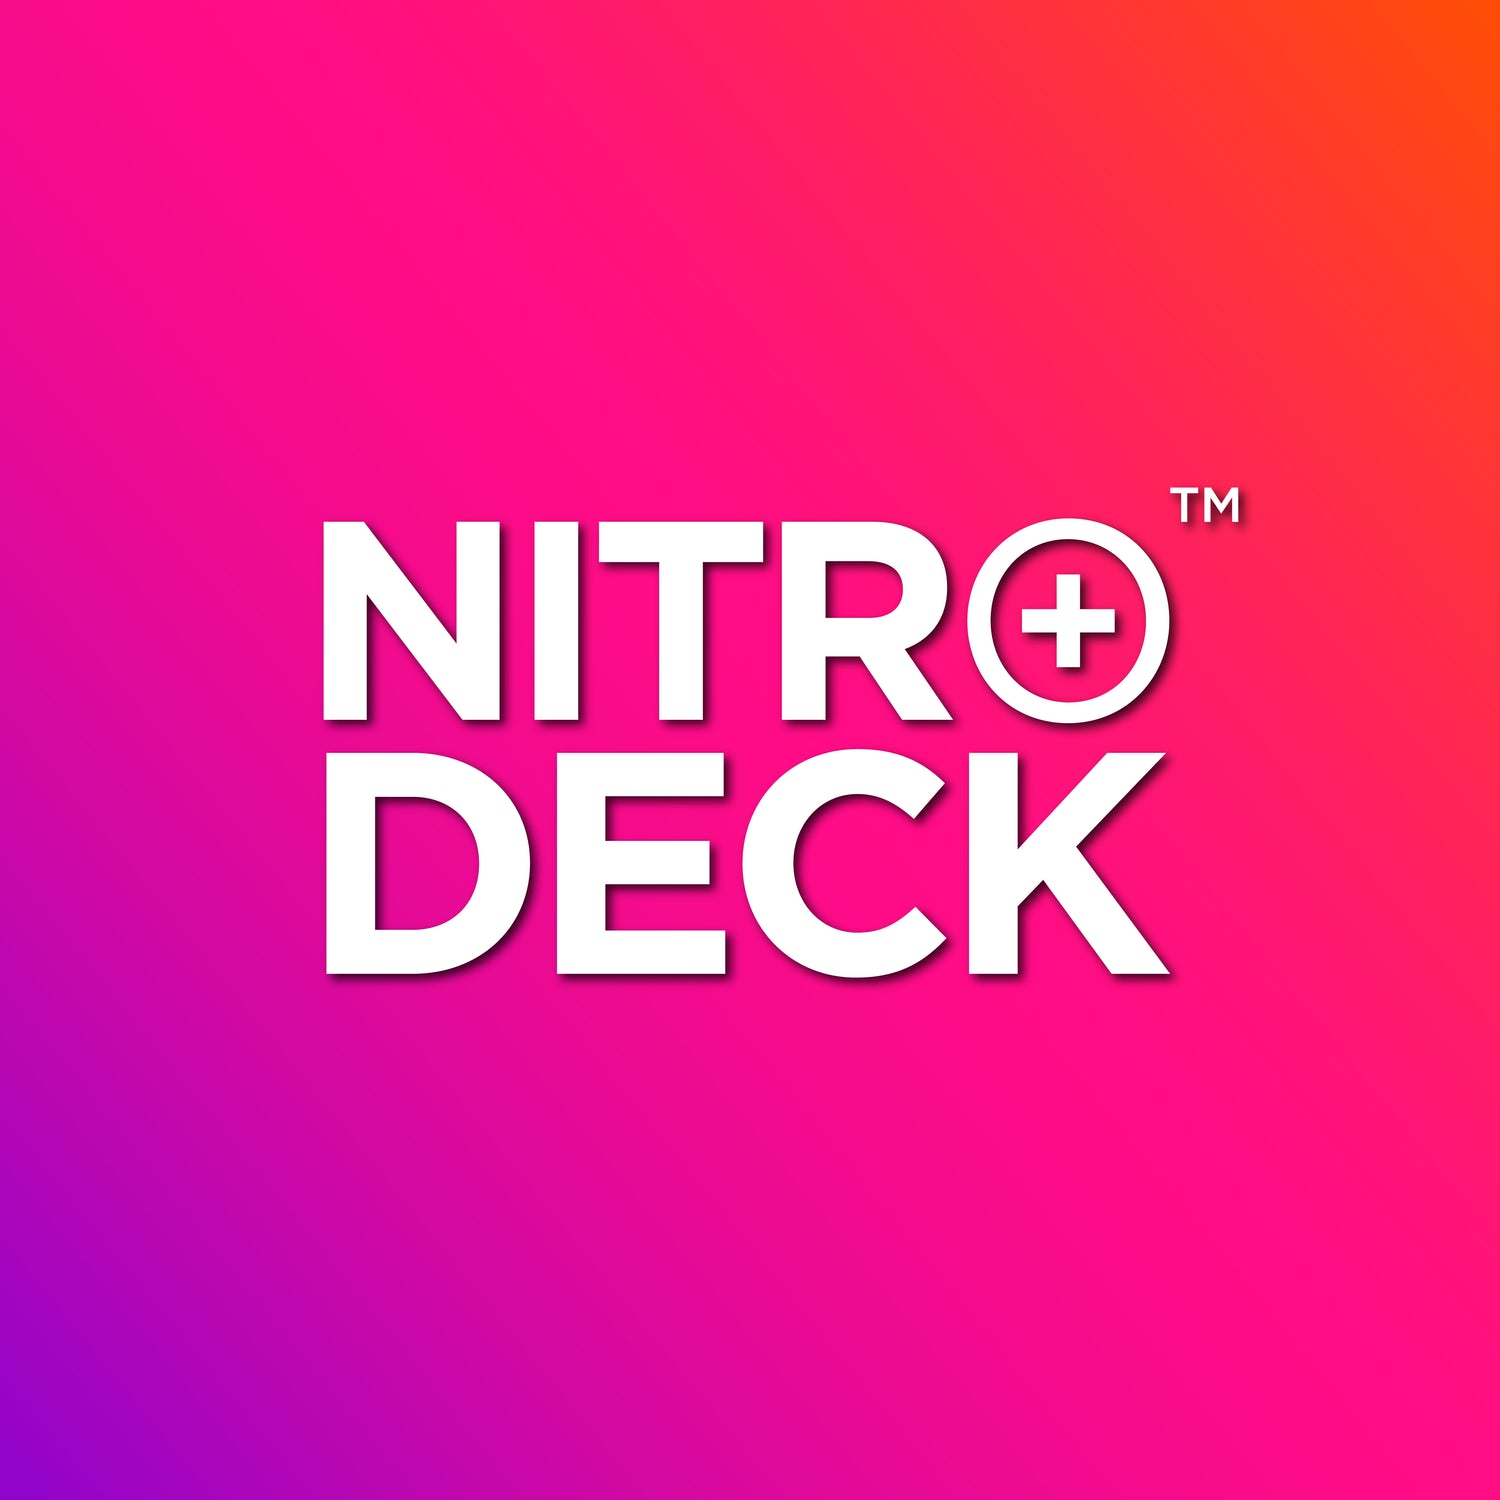 Announcing Nitro Deck+, a direct result of your community feedback!